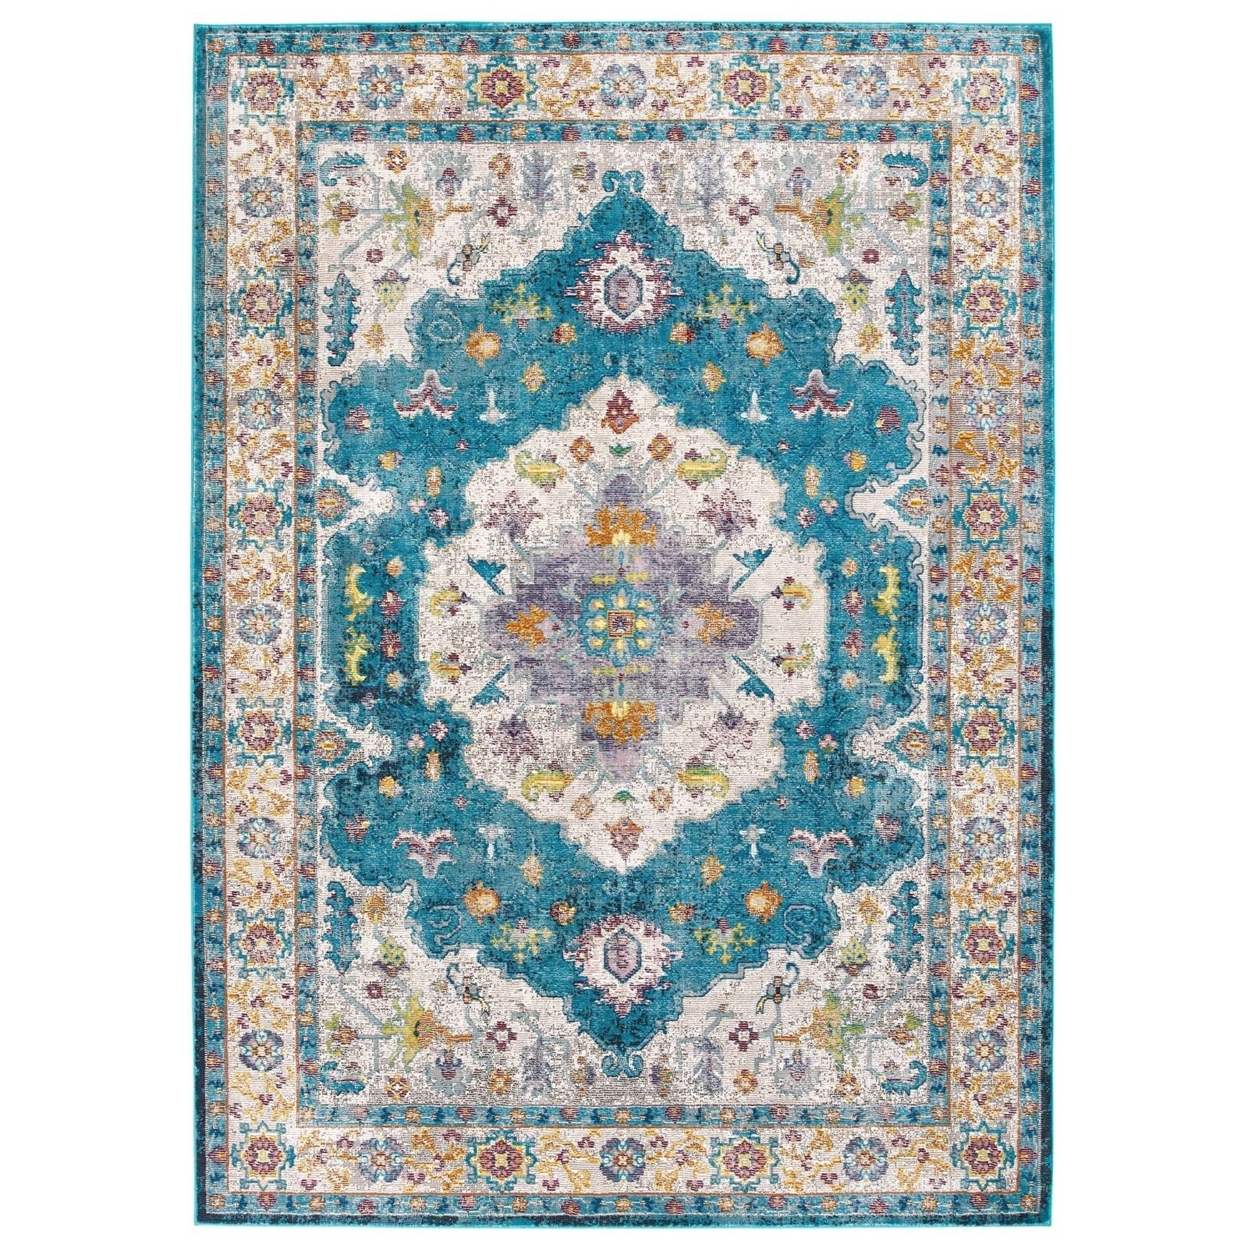 Success Anisah Distressed Floral Persian Medallion 5x8 Area Rug, Blue, Ivory, Yellow, Orange